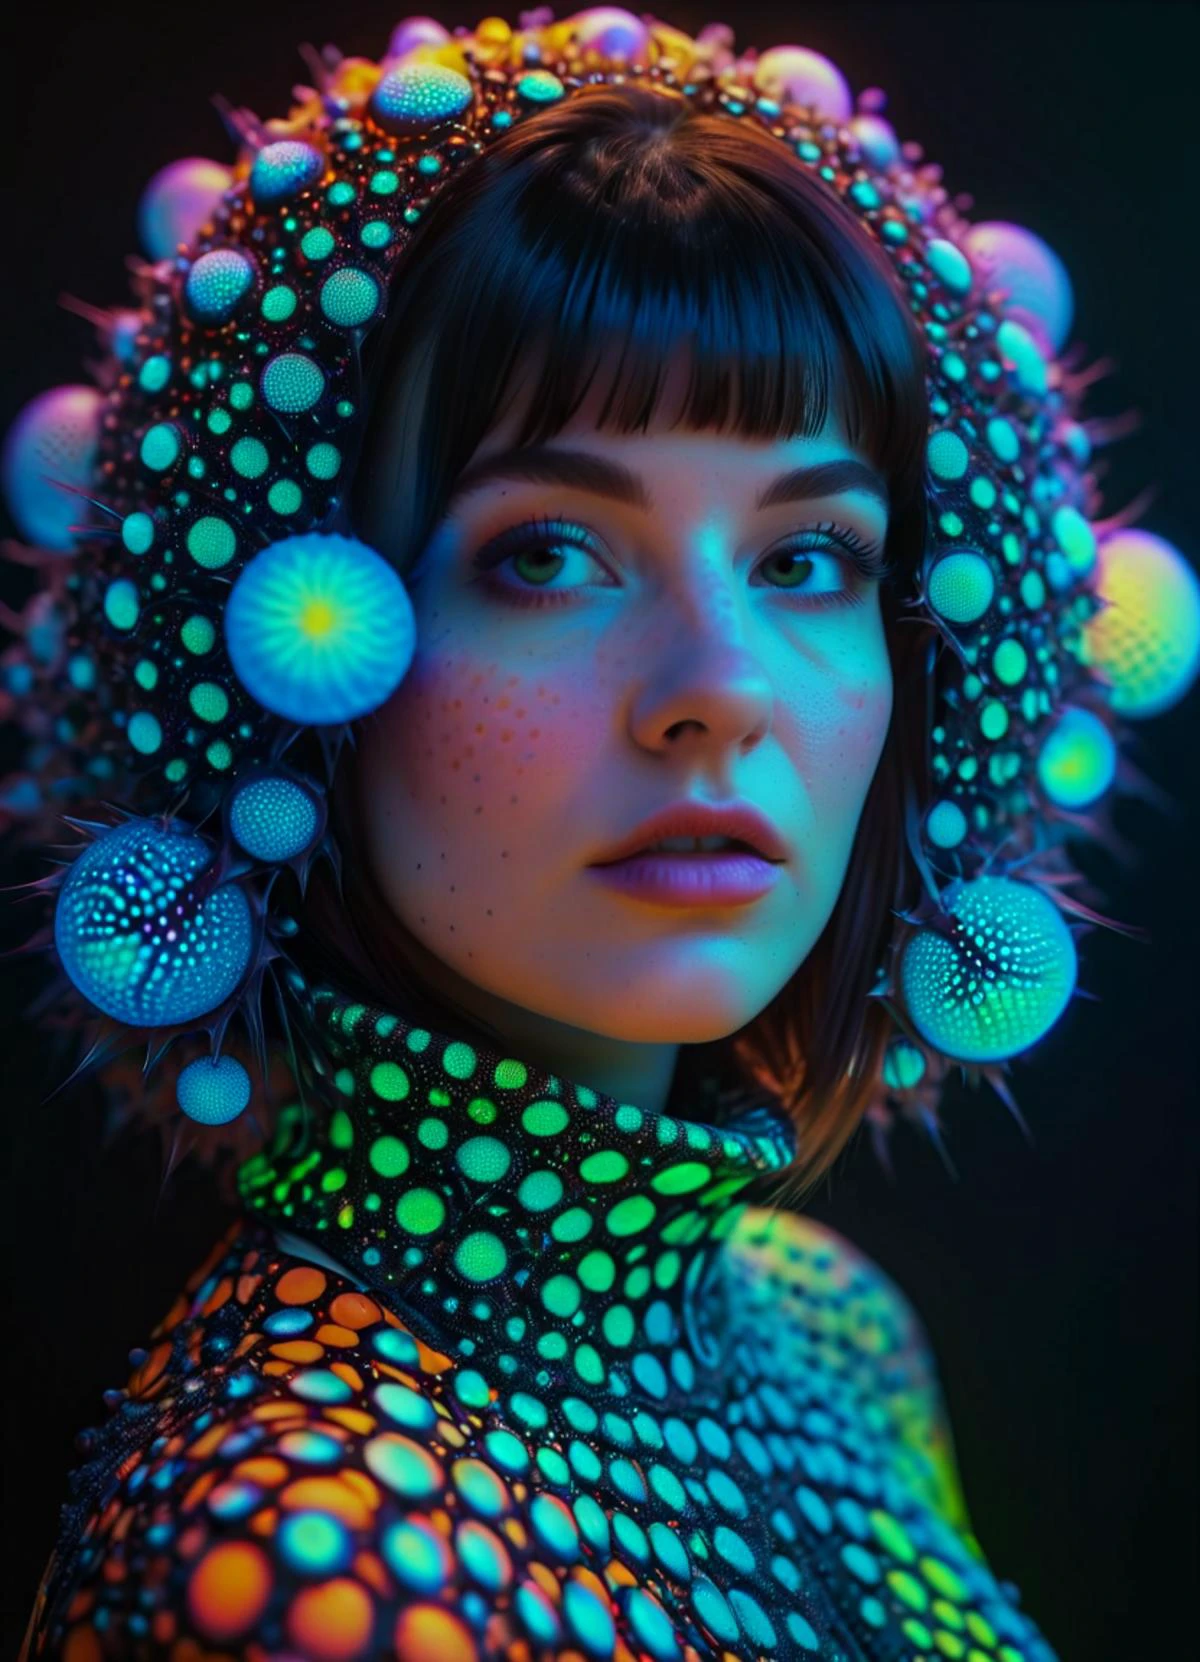 woman wearing Fashion designs inspired by radiolarians trypophobia subsurface scattering, Photorealistic, Hyperrealistic, analog style, realistic, film photography, soft lighting, heavy shadow, Ombre color scheme of neon orange, neon pink, neon blue, neon yellow, neon green,